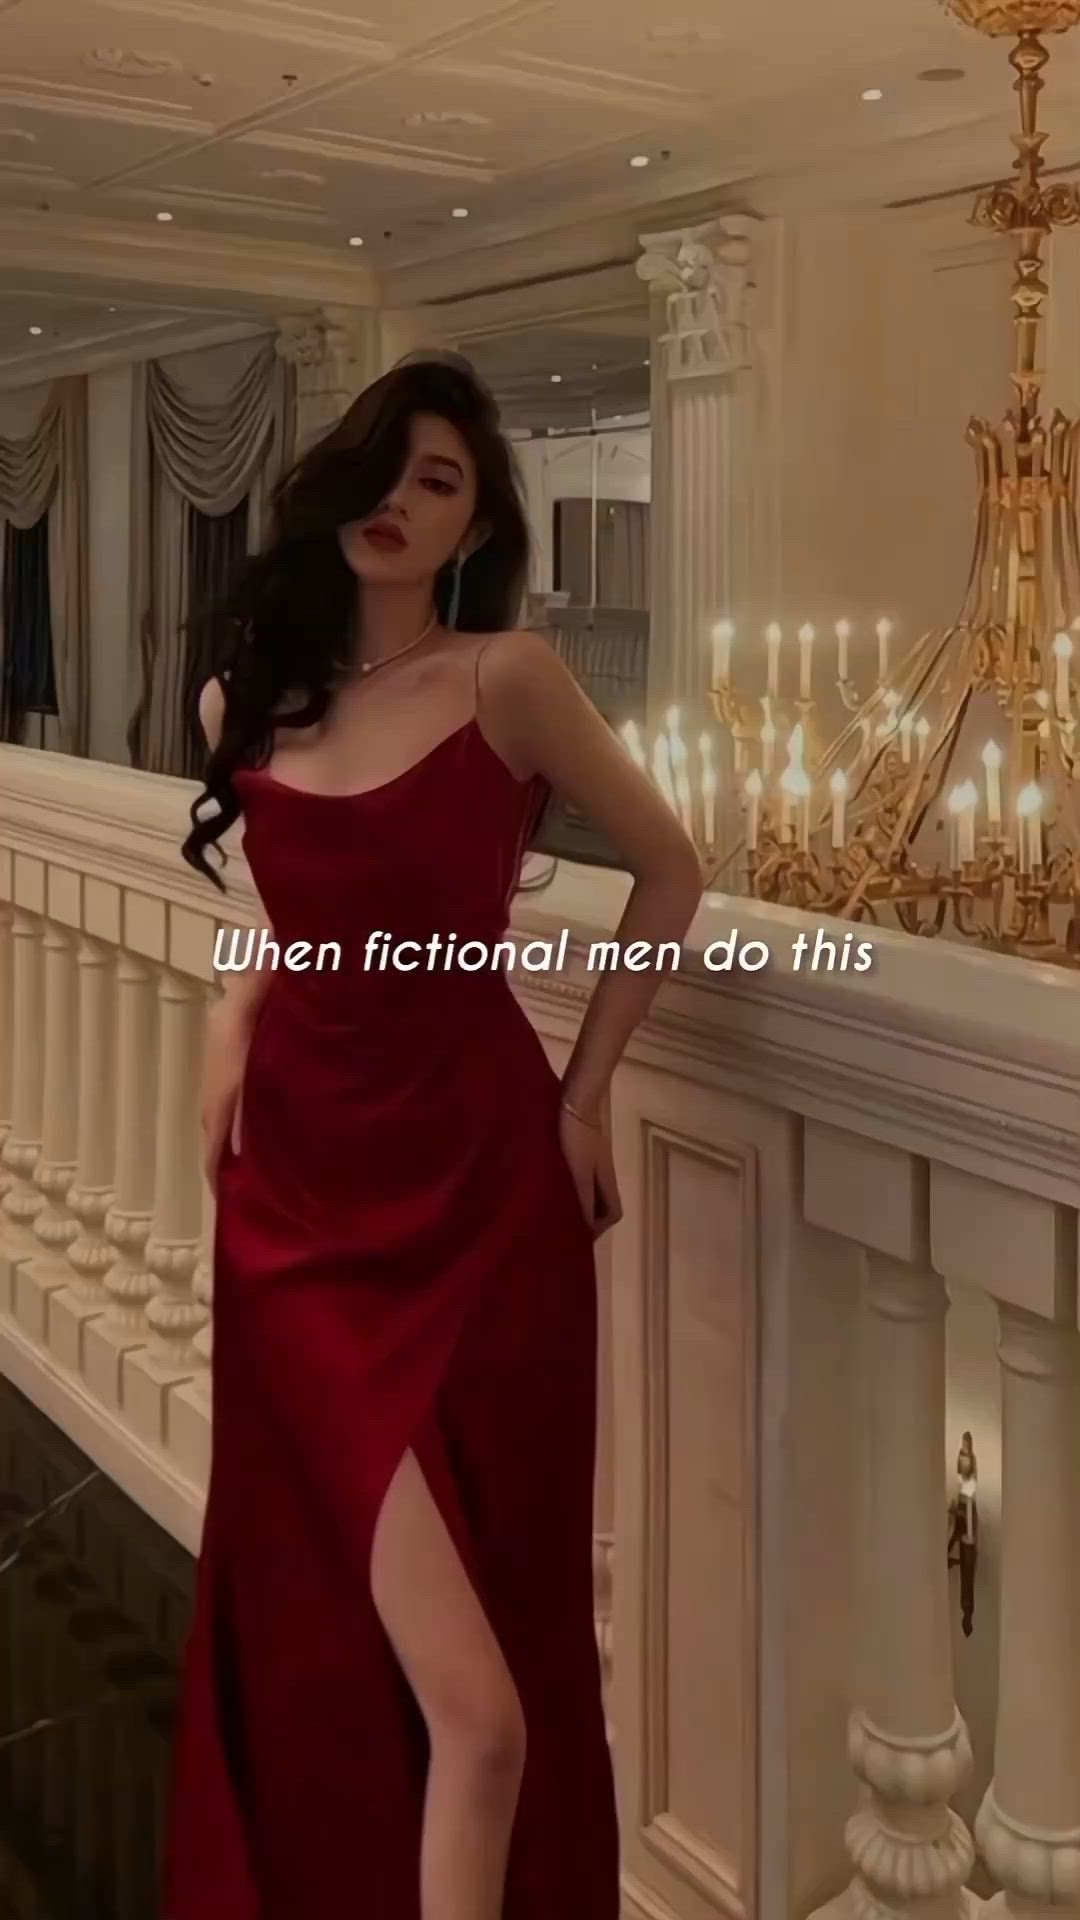 This may contain: a woman in a red dress standing next to a wall with chandeliers on it